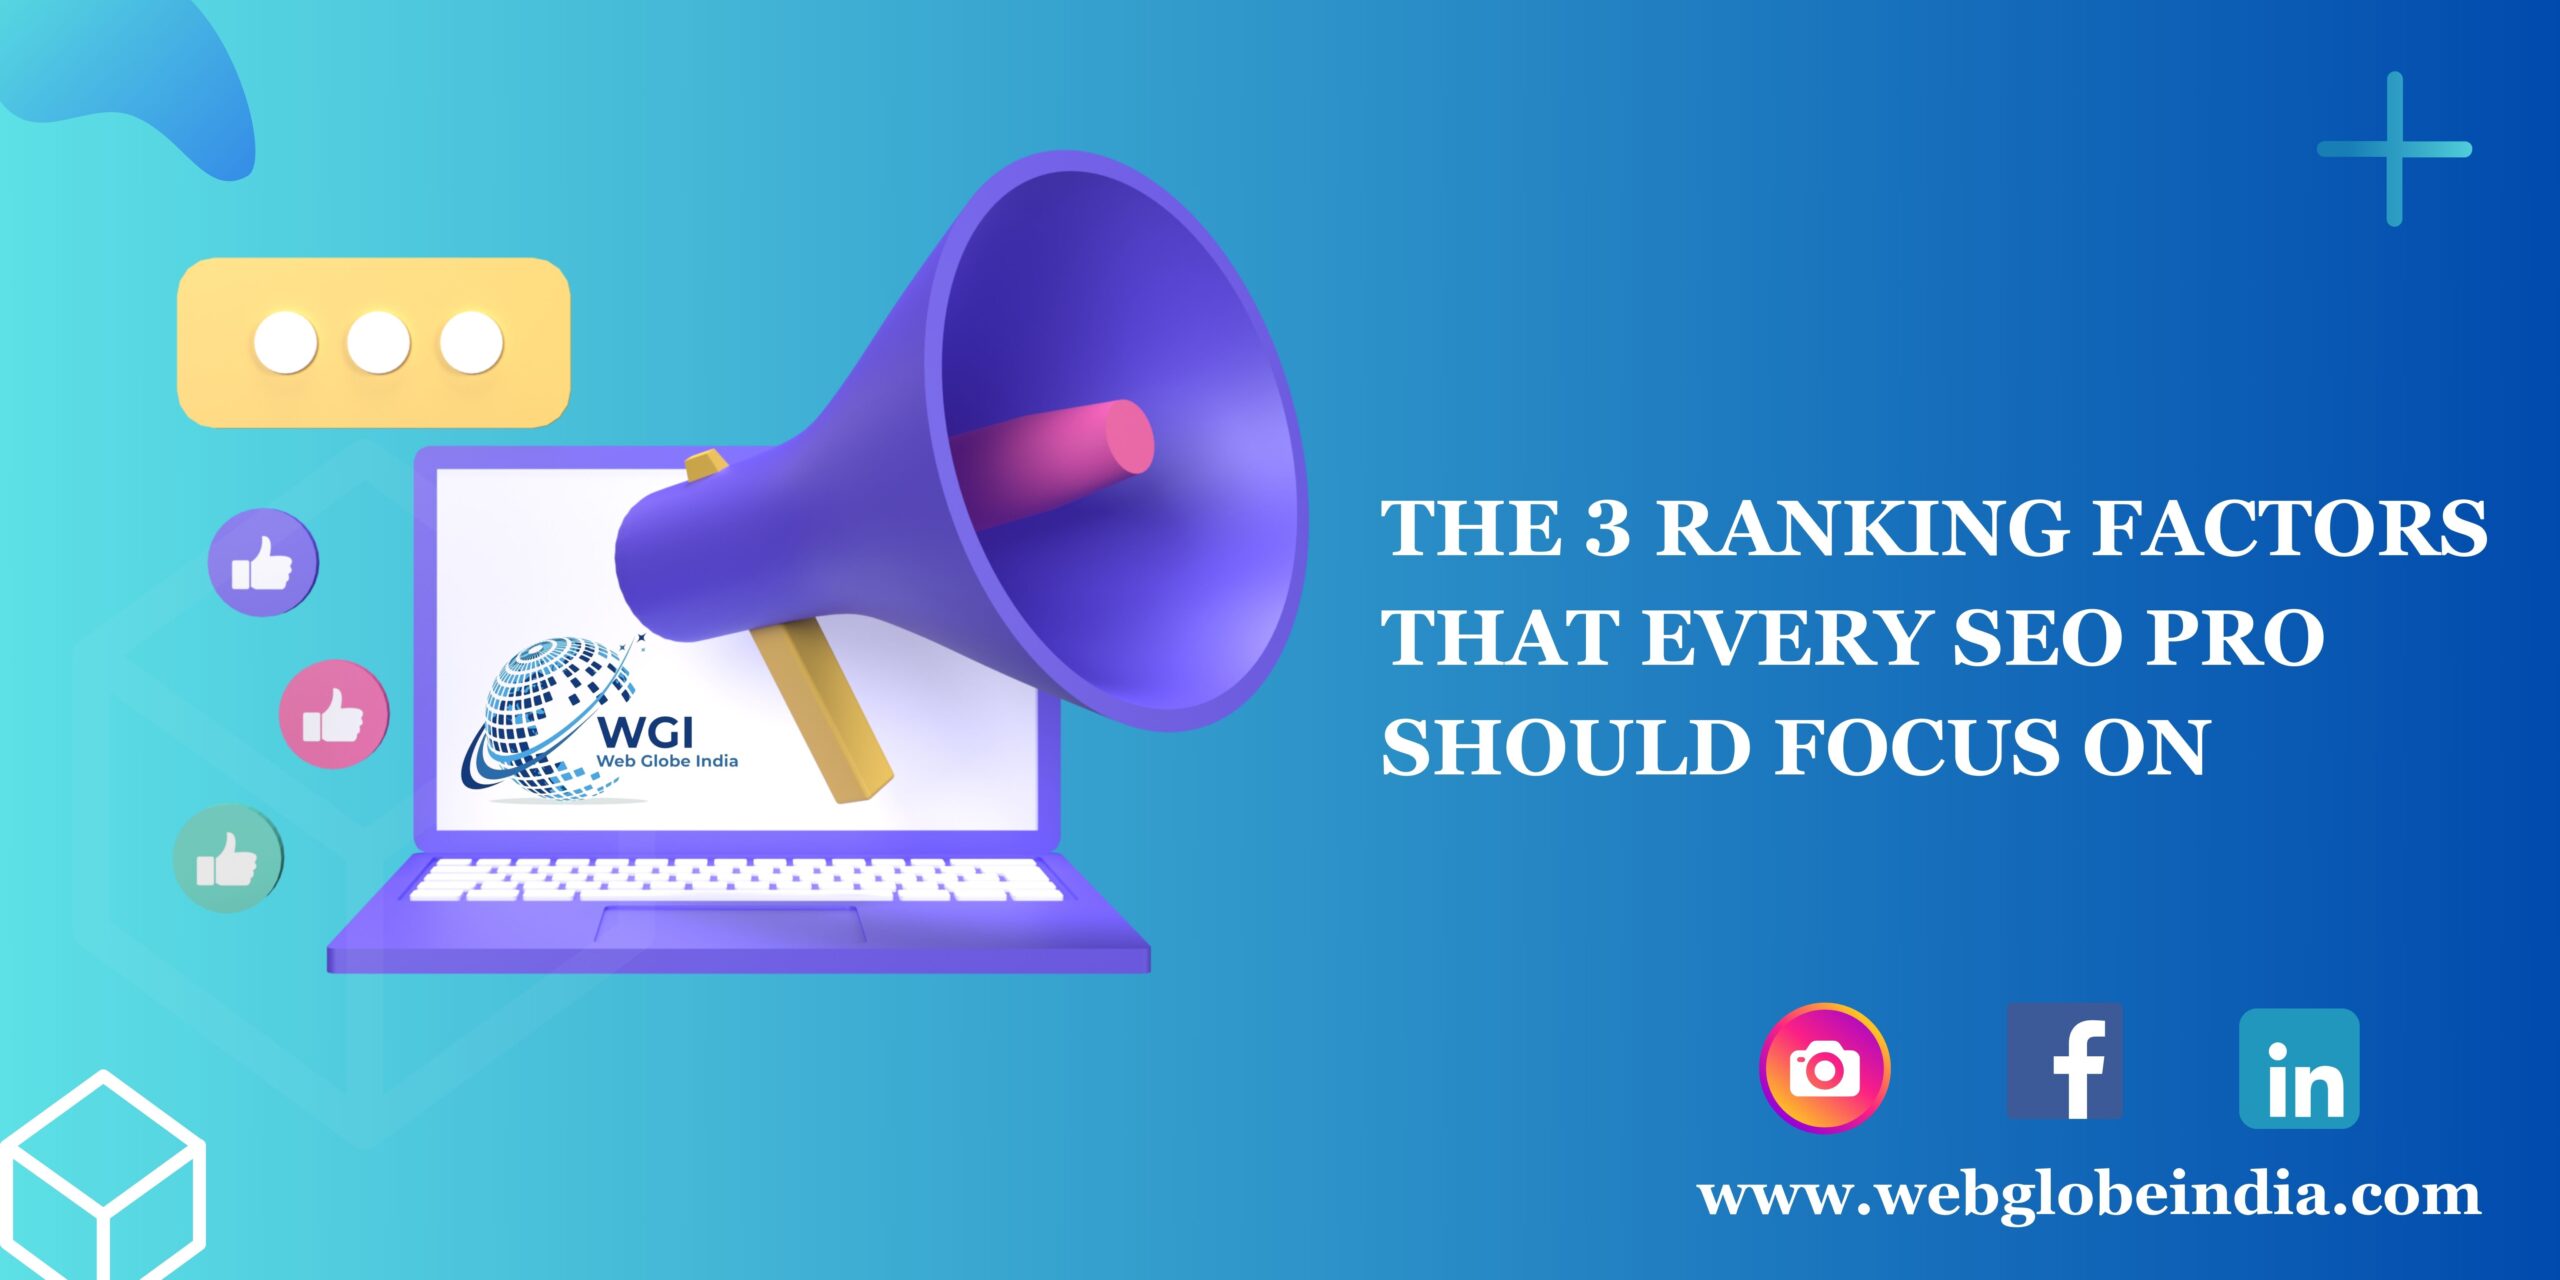 The 3 Ranking Factors that every SEO pro should focus on